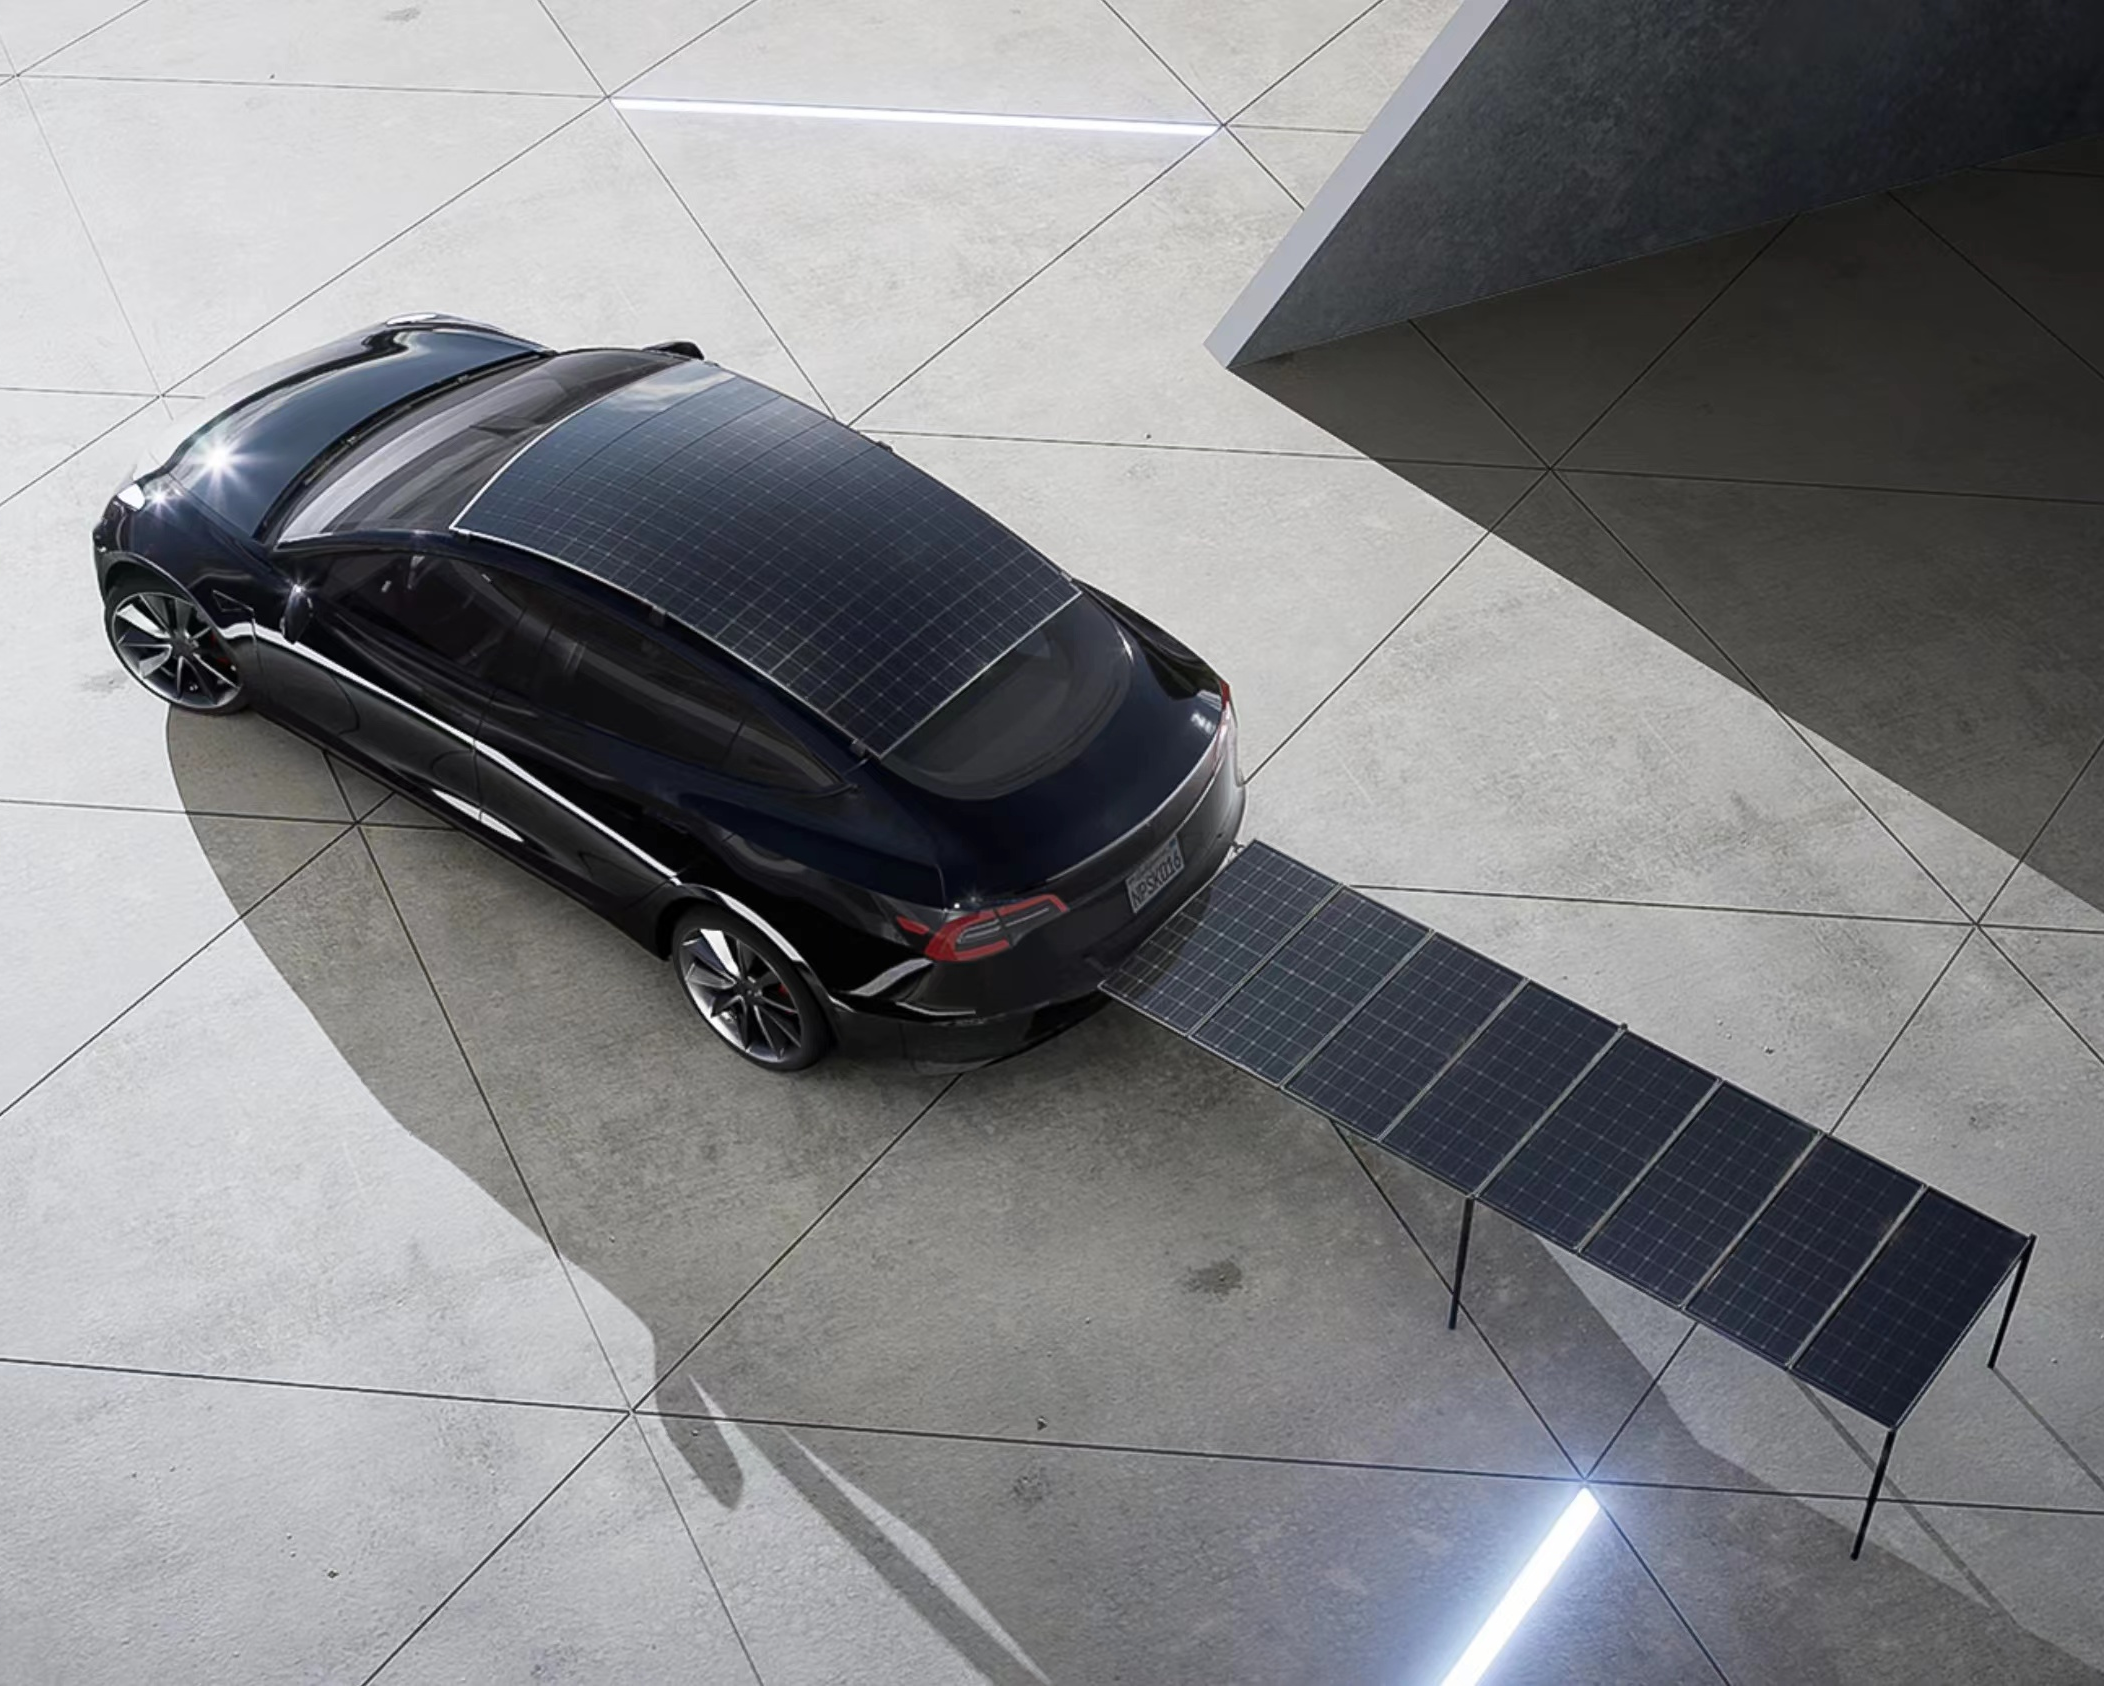 What to Consider When Charging Your Vehicle With a Portable Solar EV charger?